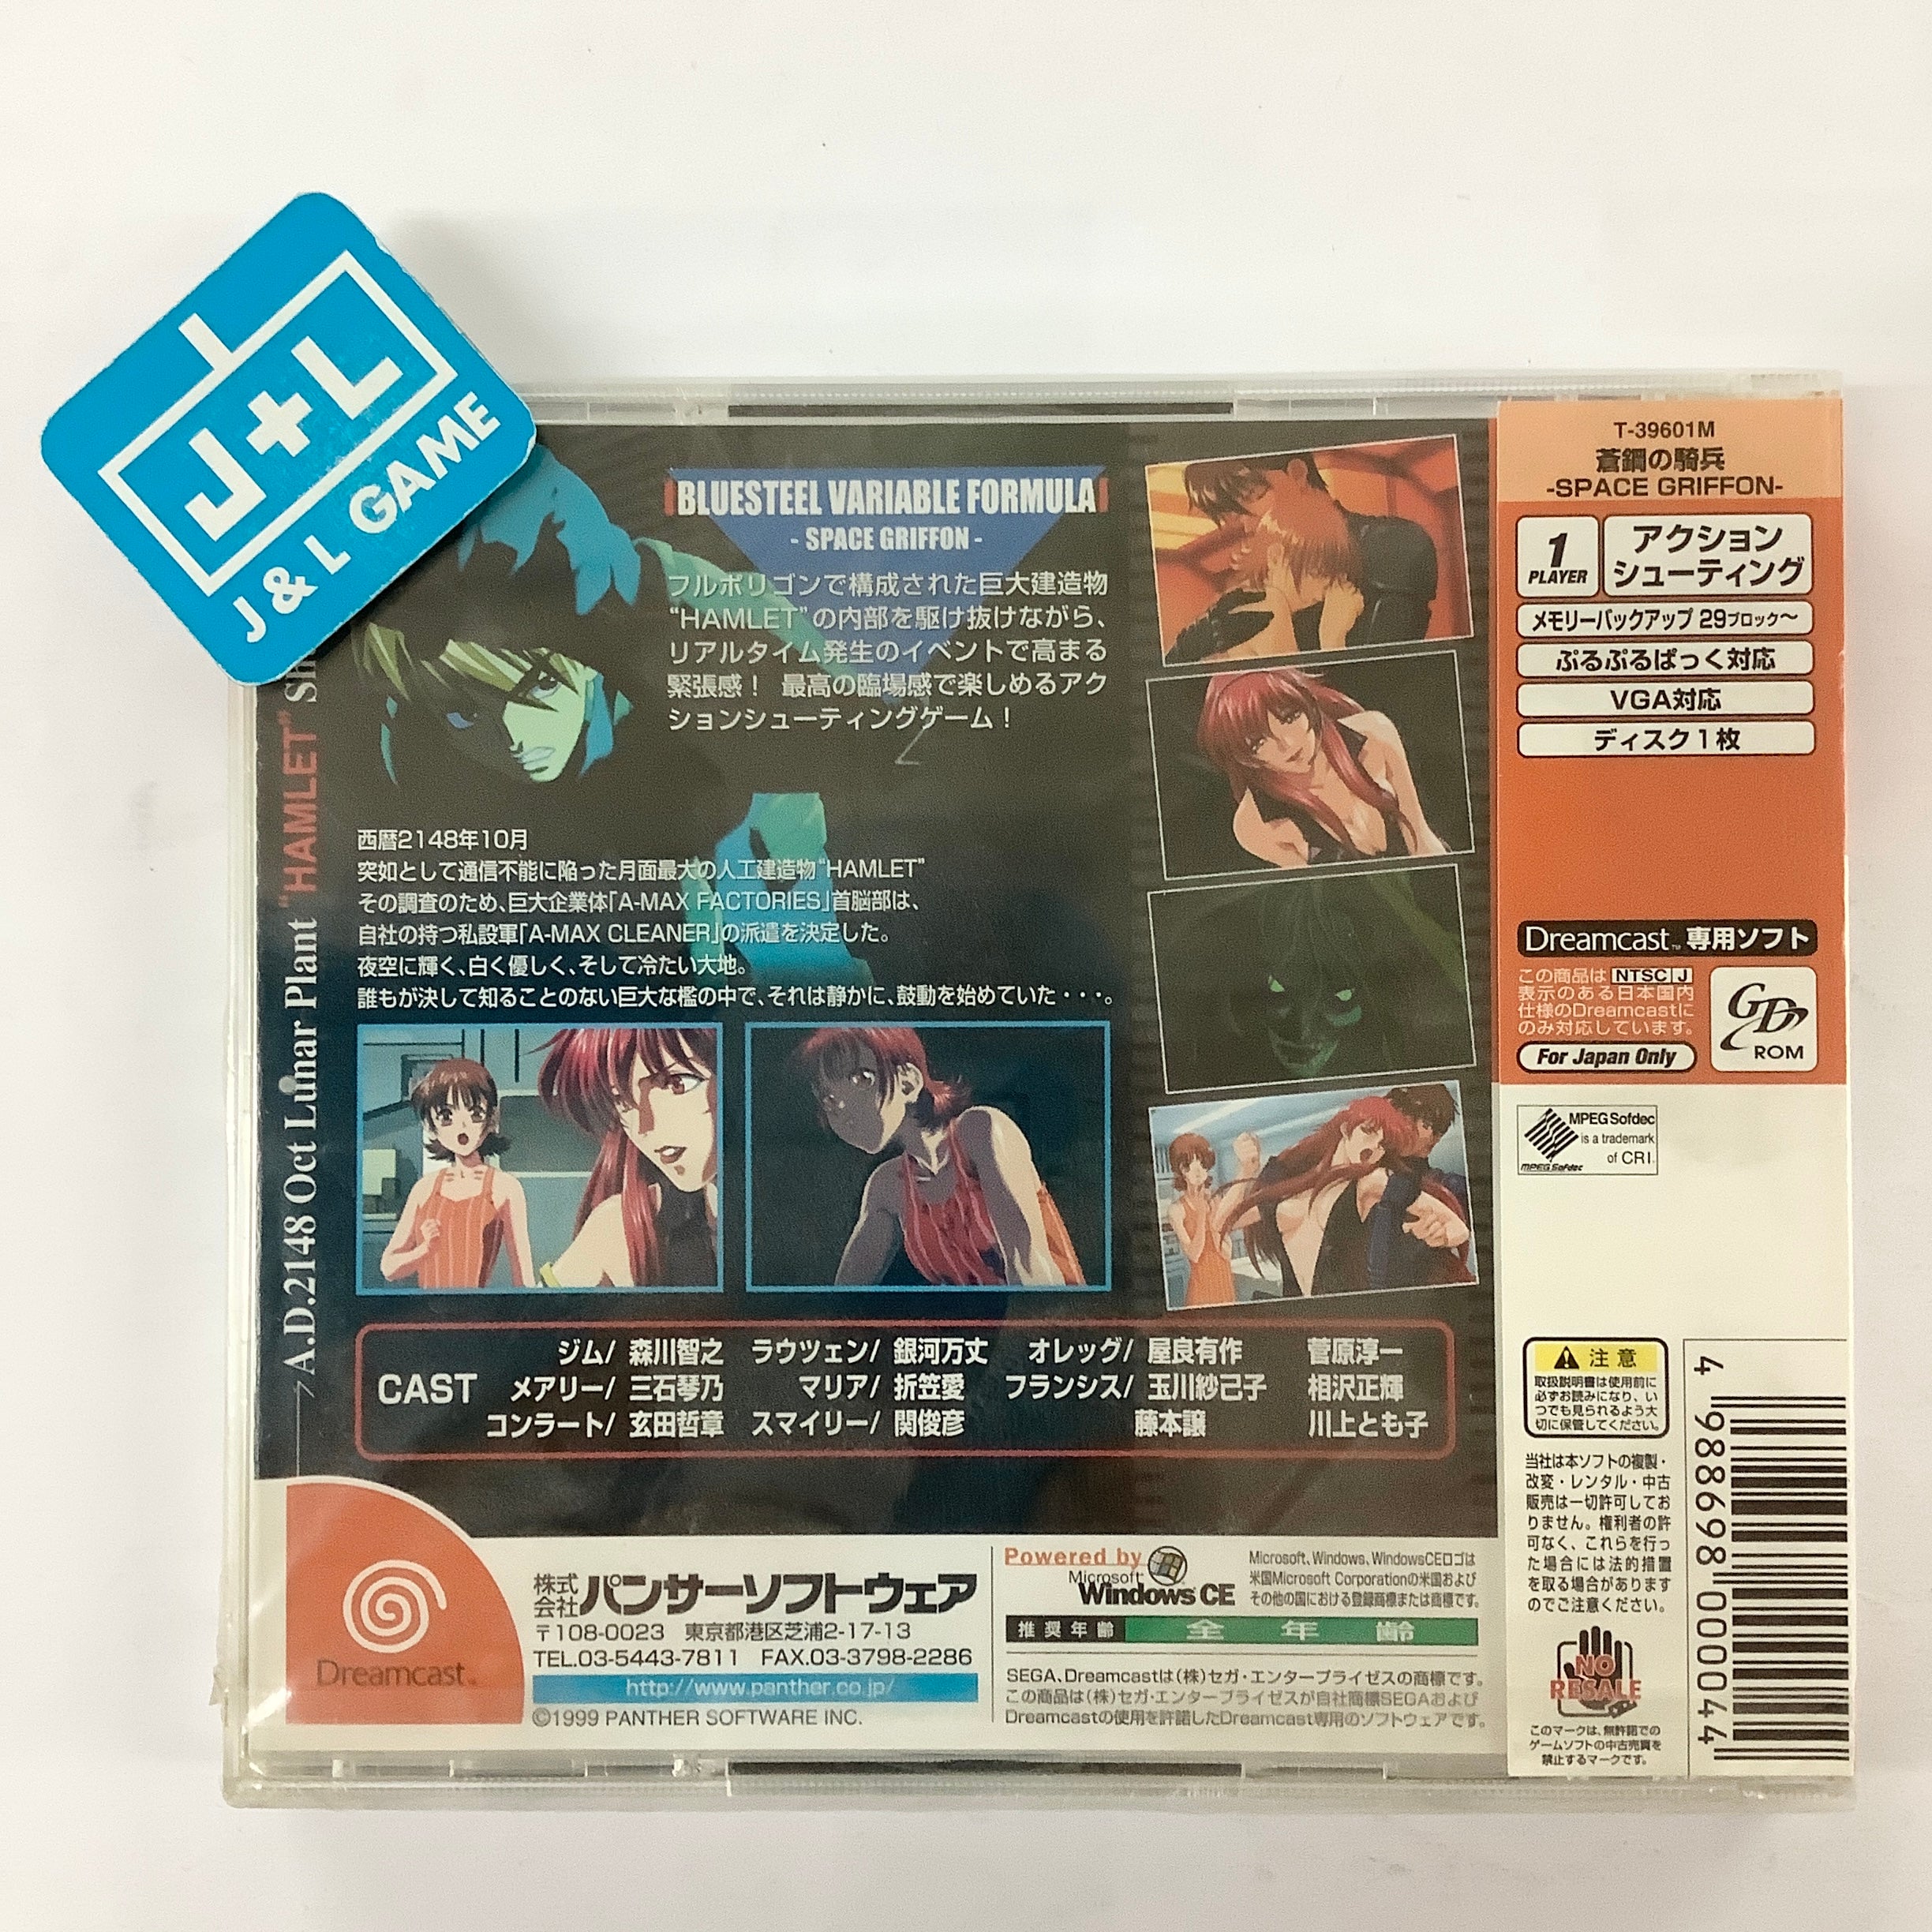 Aoi Hagane no Kihei: Space Griffon - (DC) SEGA Dreamcast (Japanese Import) Video Games Panther Software   